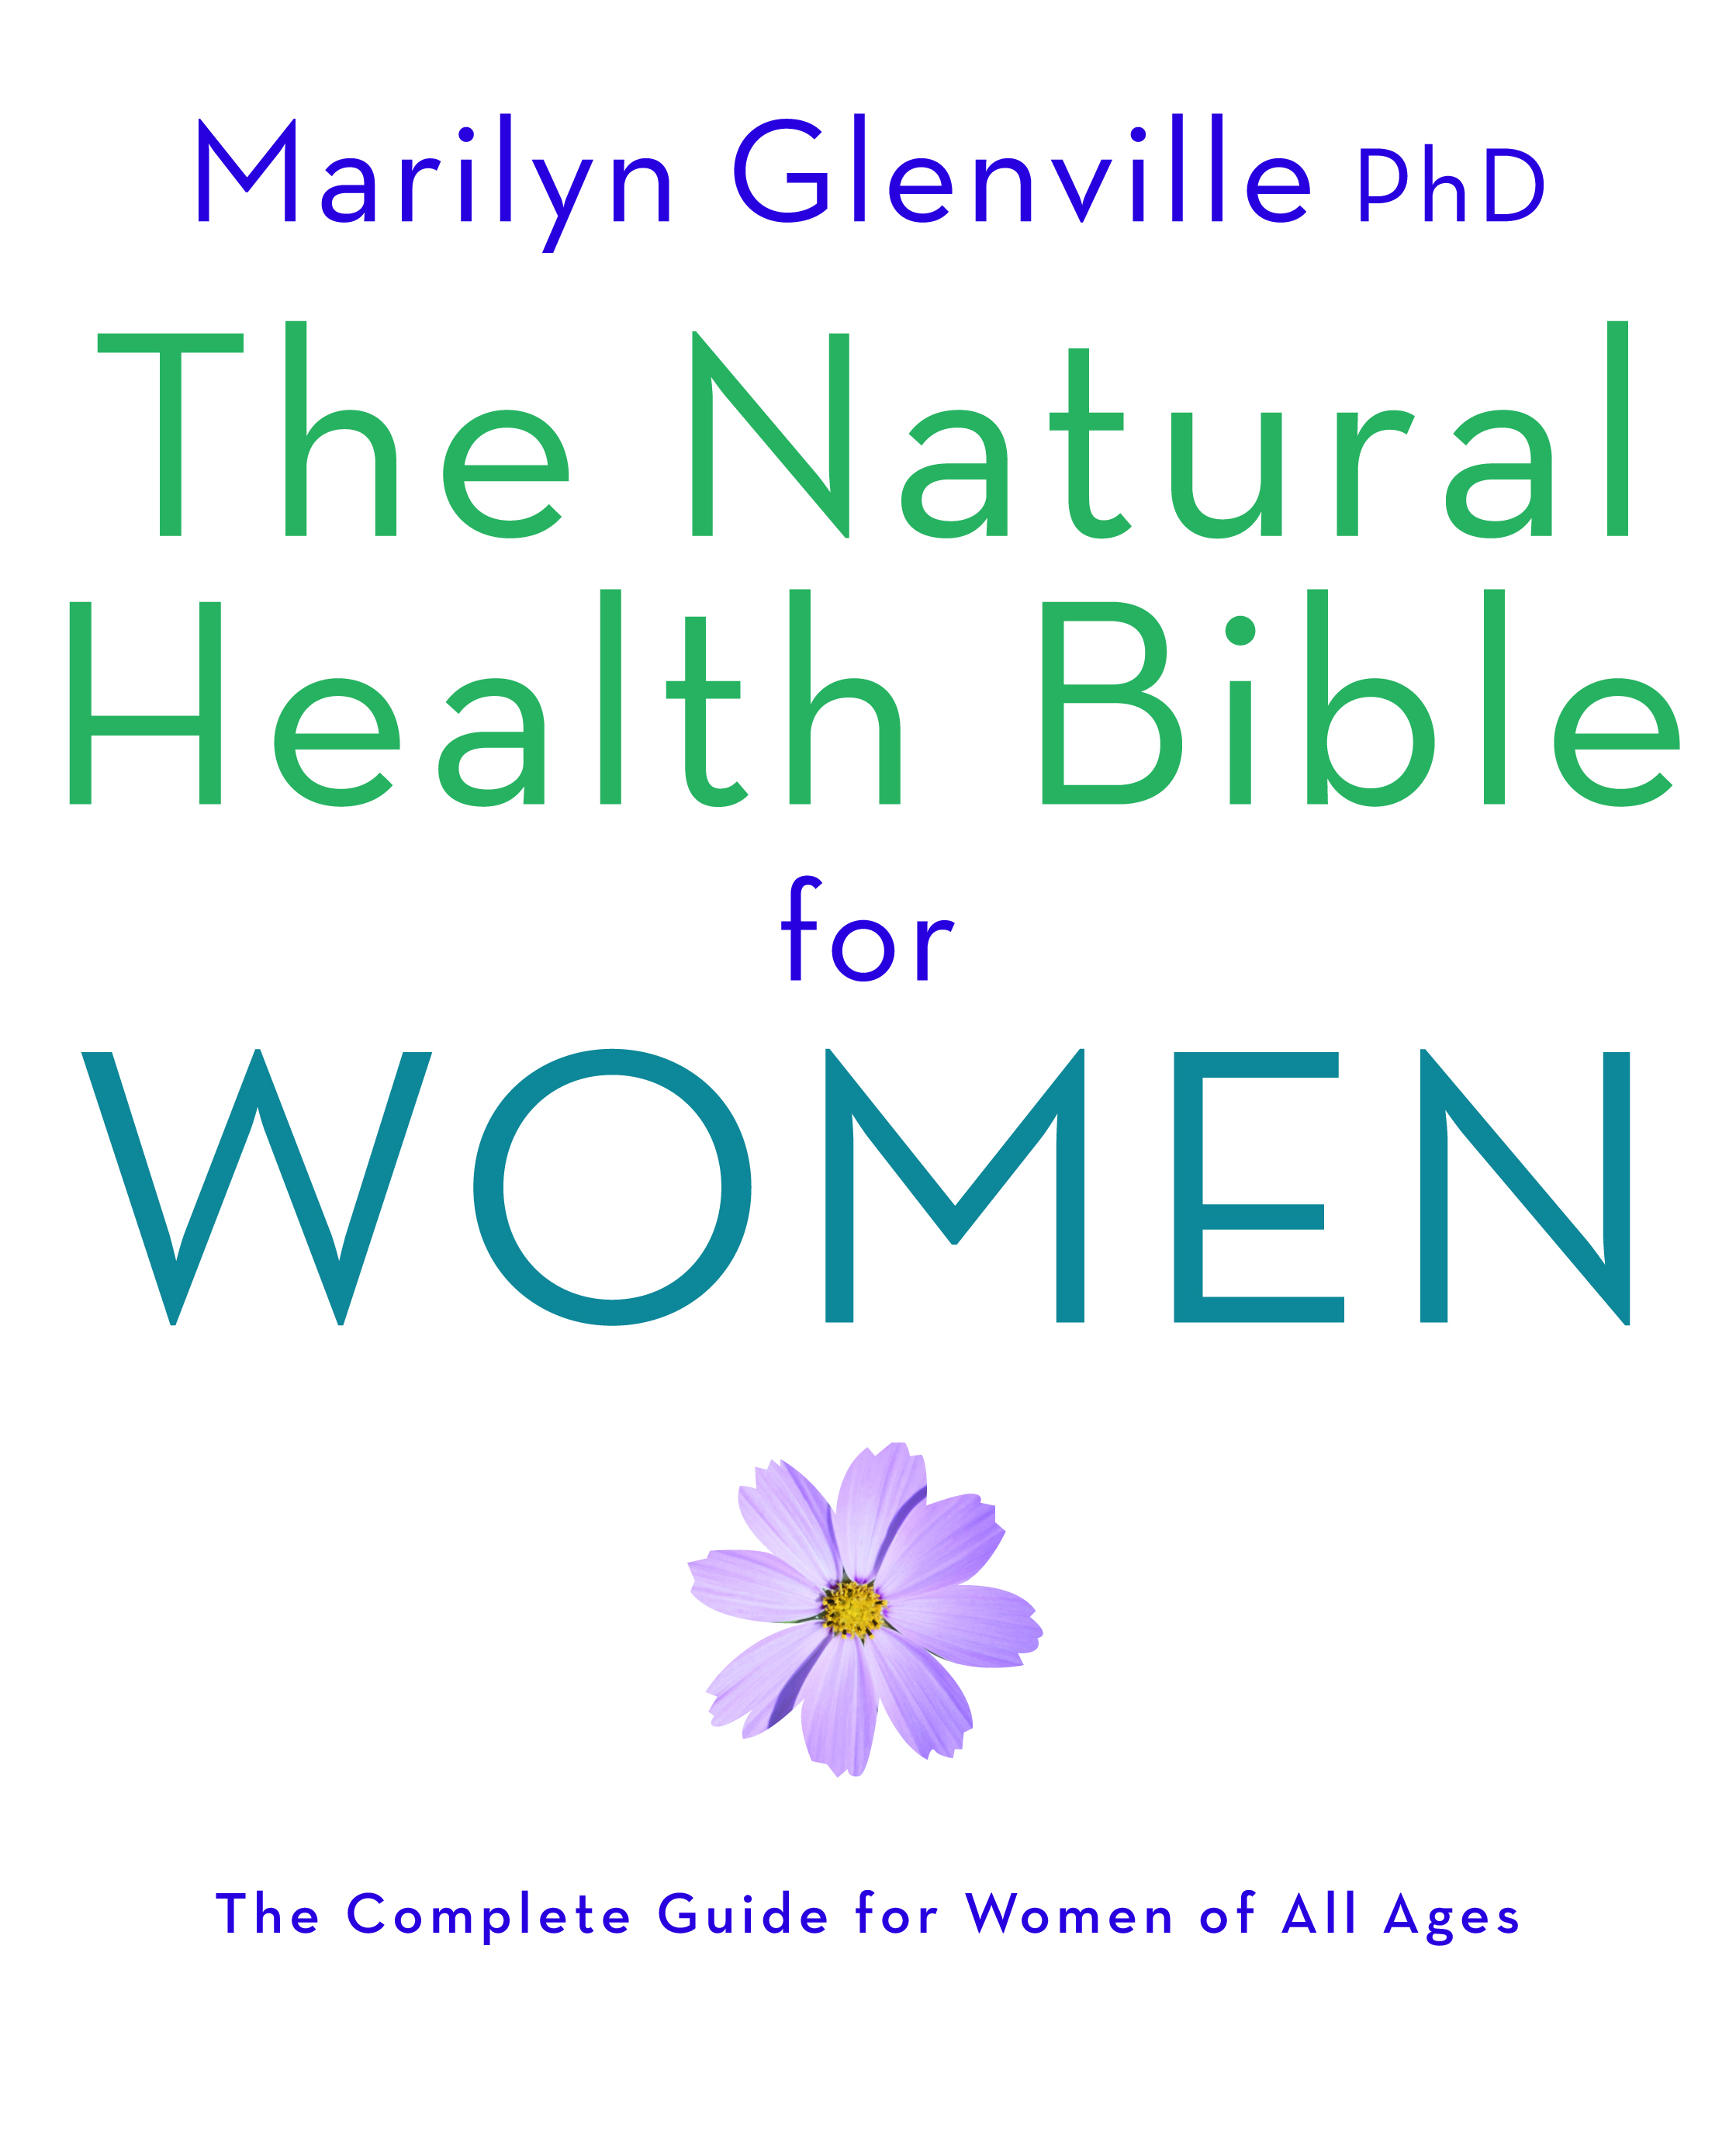 The Natural Health Bible for Women by Marilyn Glenville.